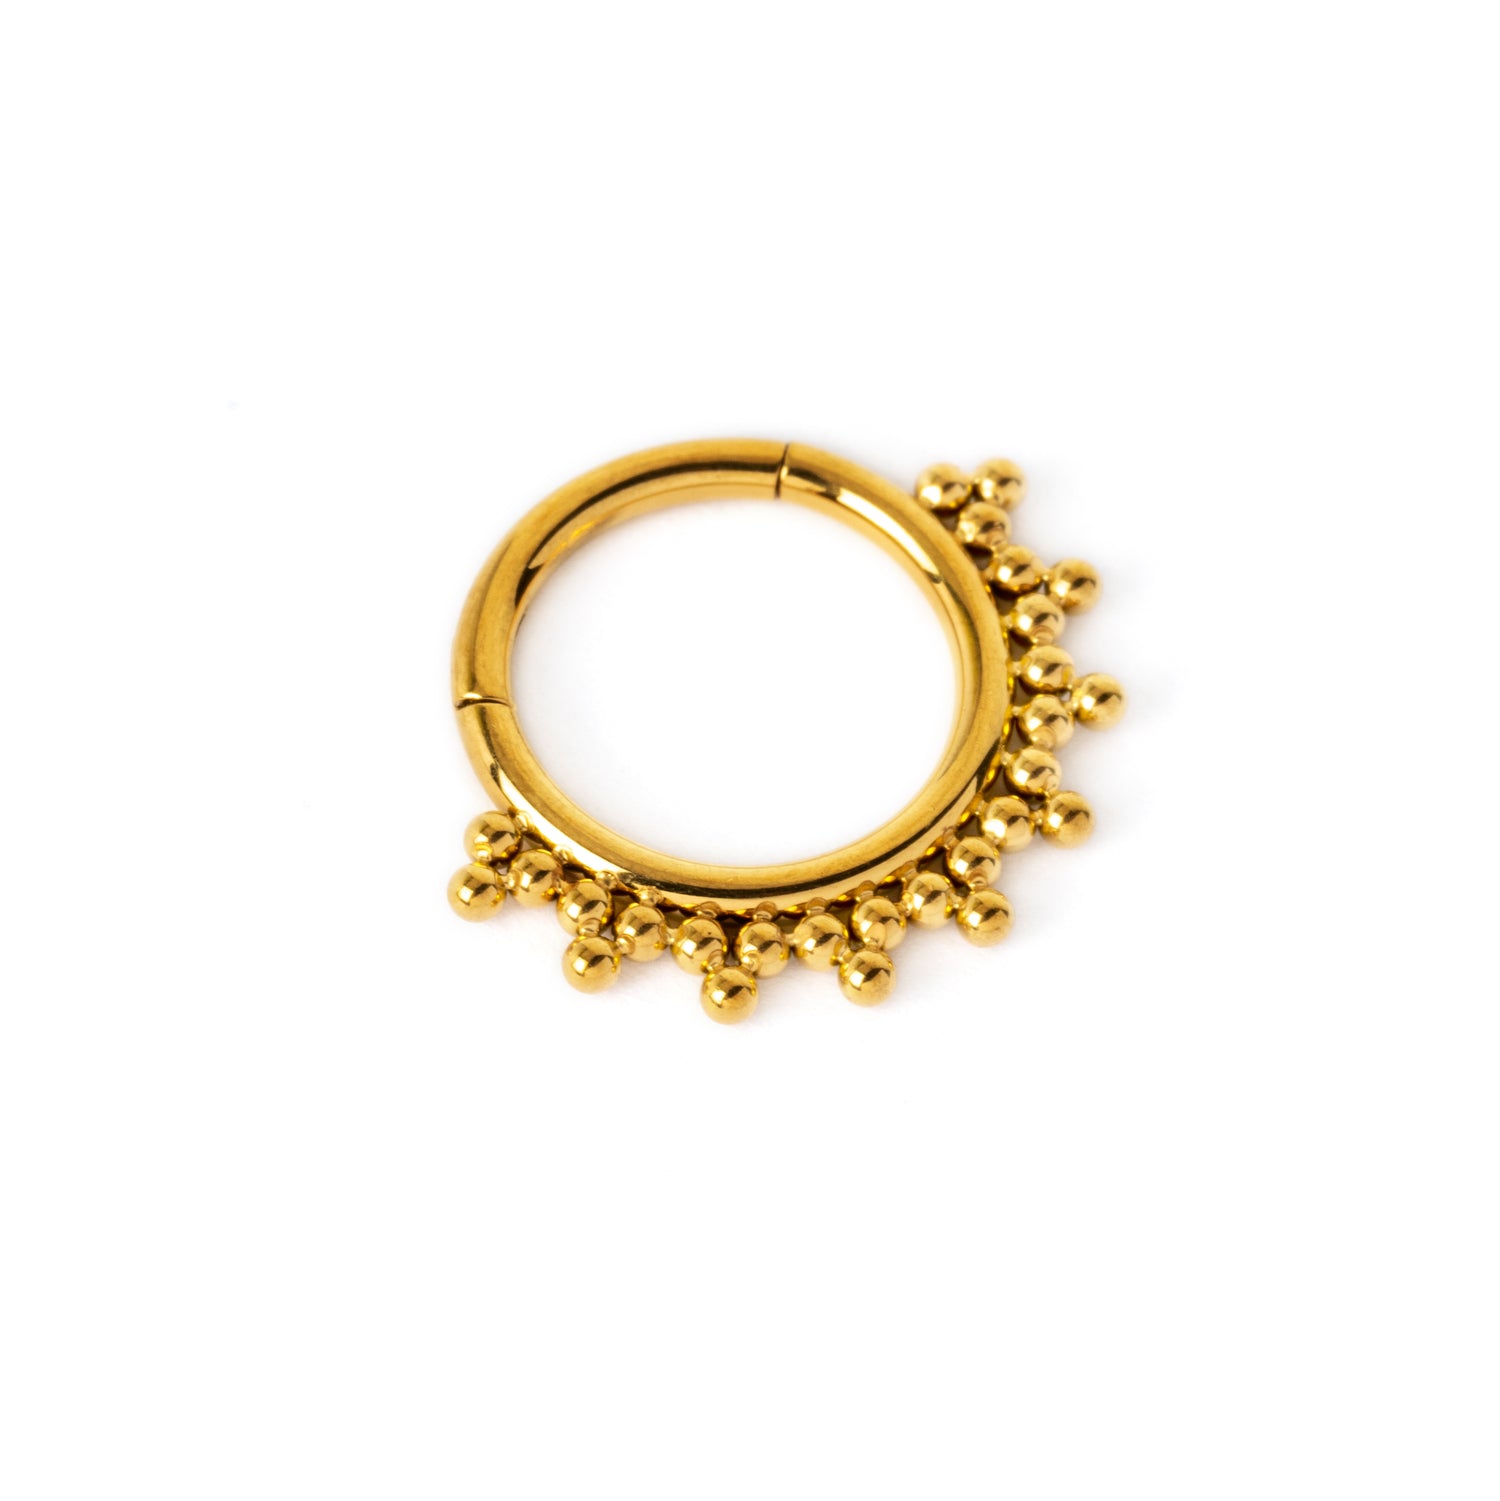 Sarika gold surgical steel septum clicker right side view